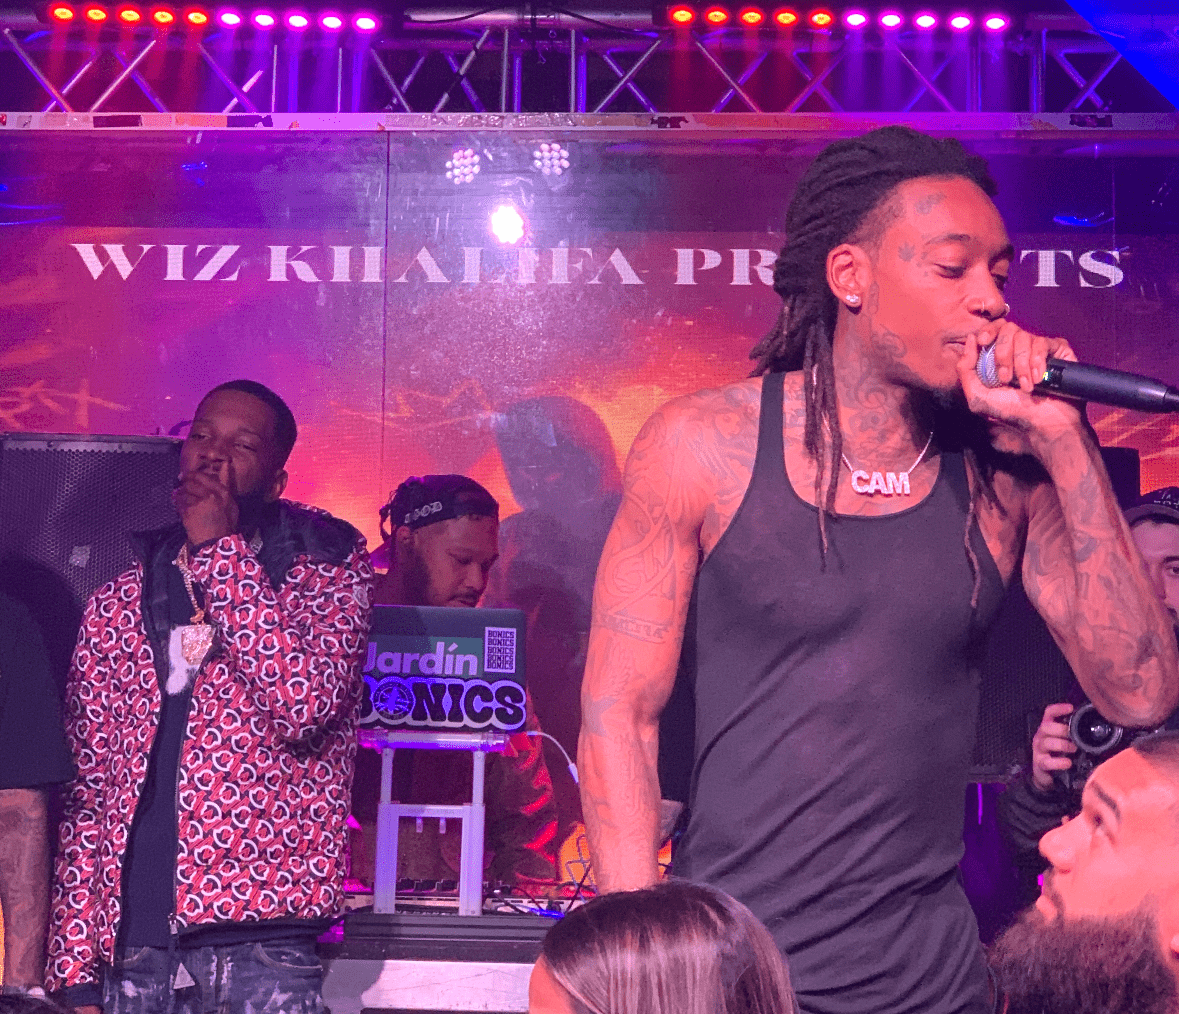 A photo of rapper Wiz Khalifa live on stage promoting his upcoming  "High School Reunion" tour.